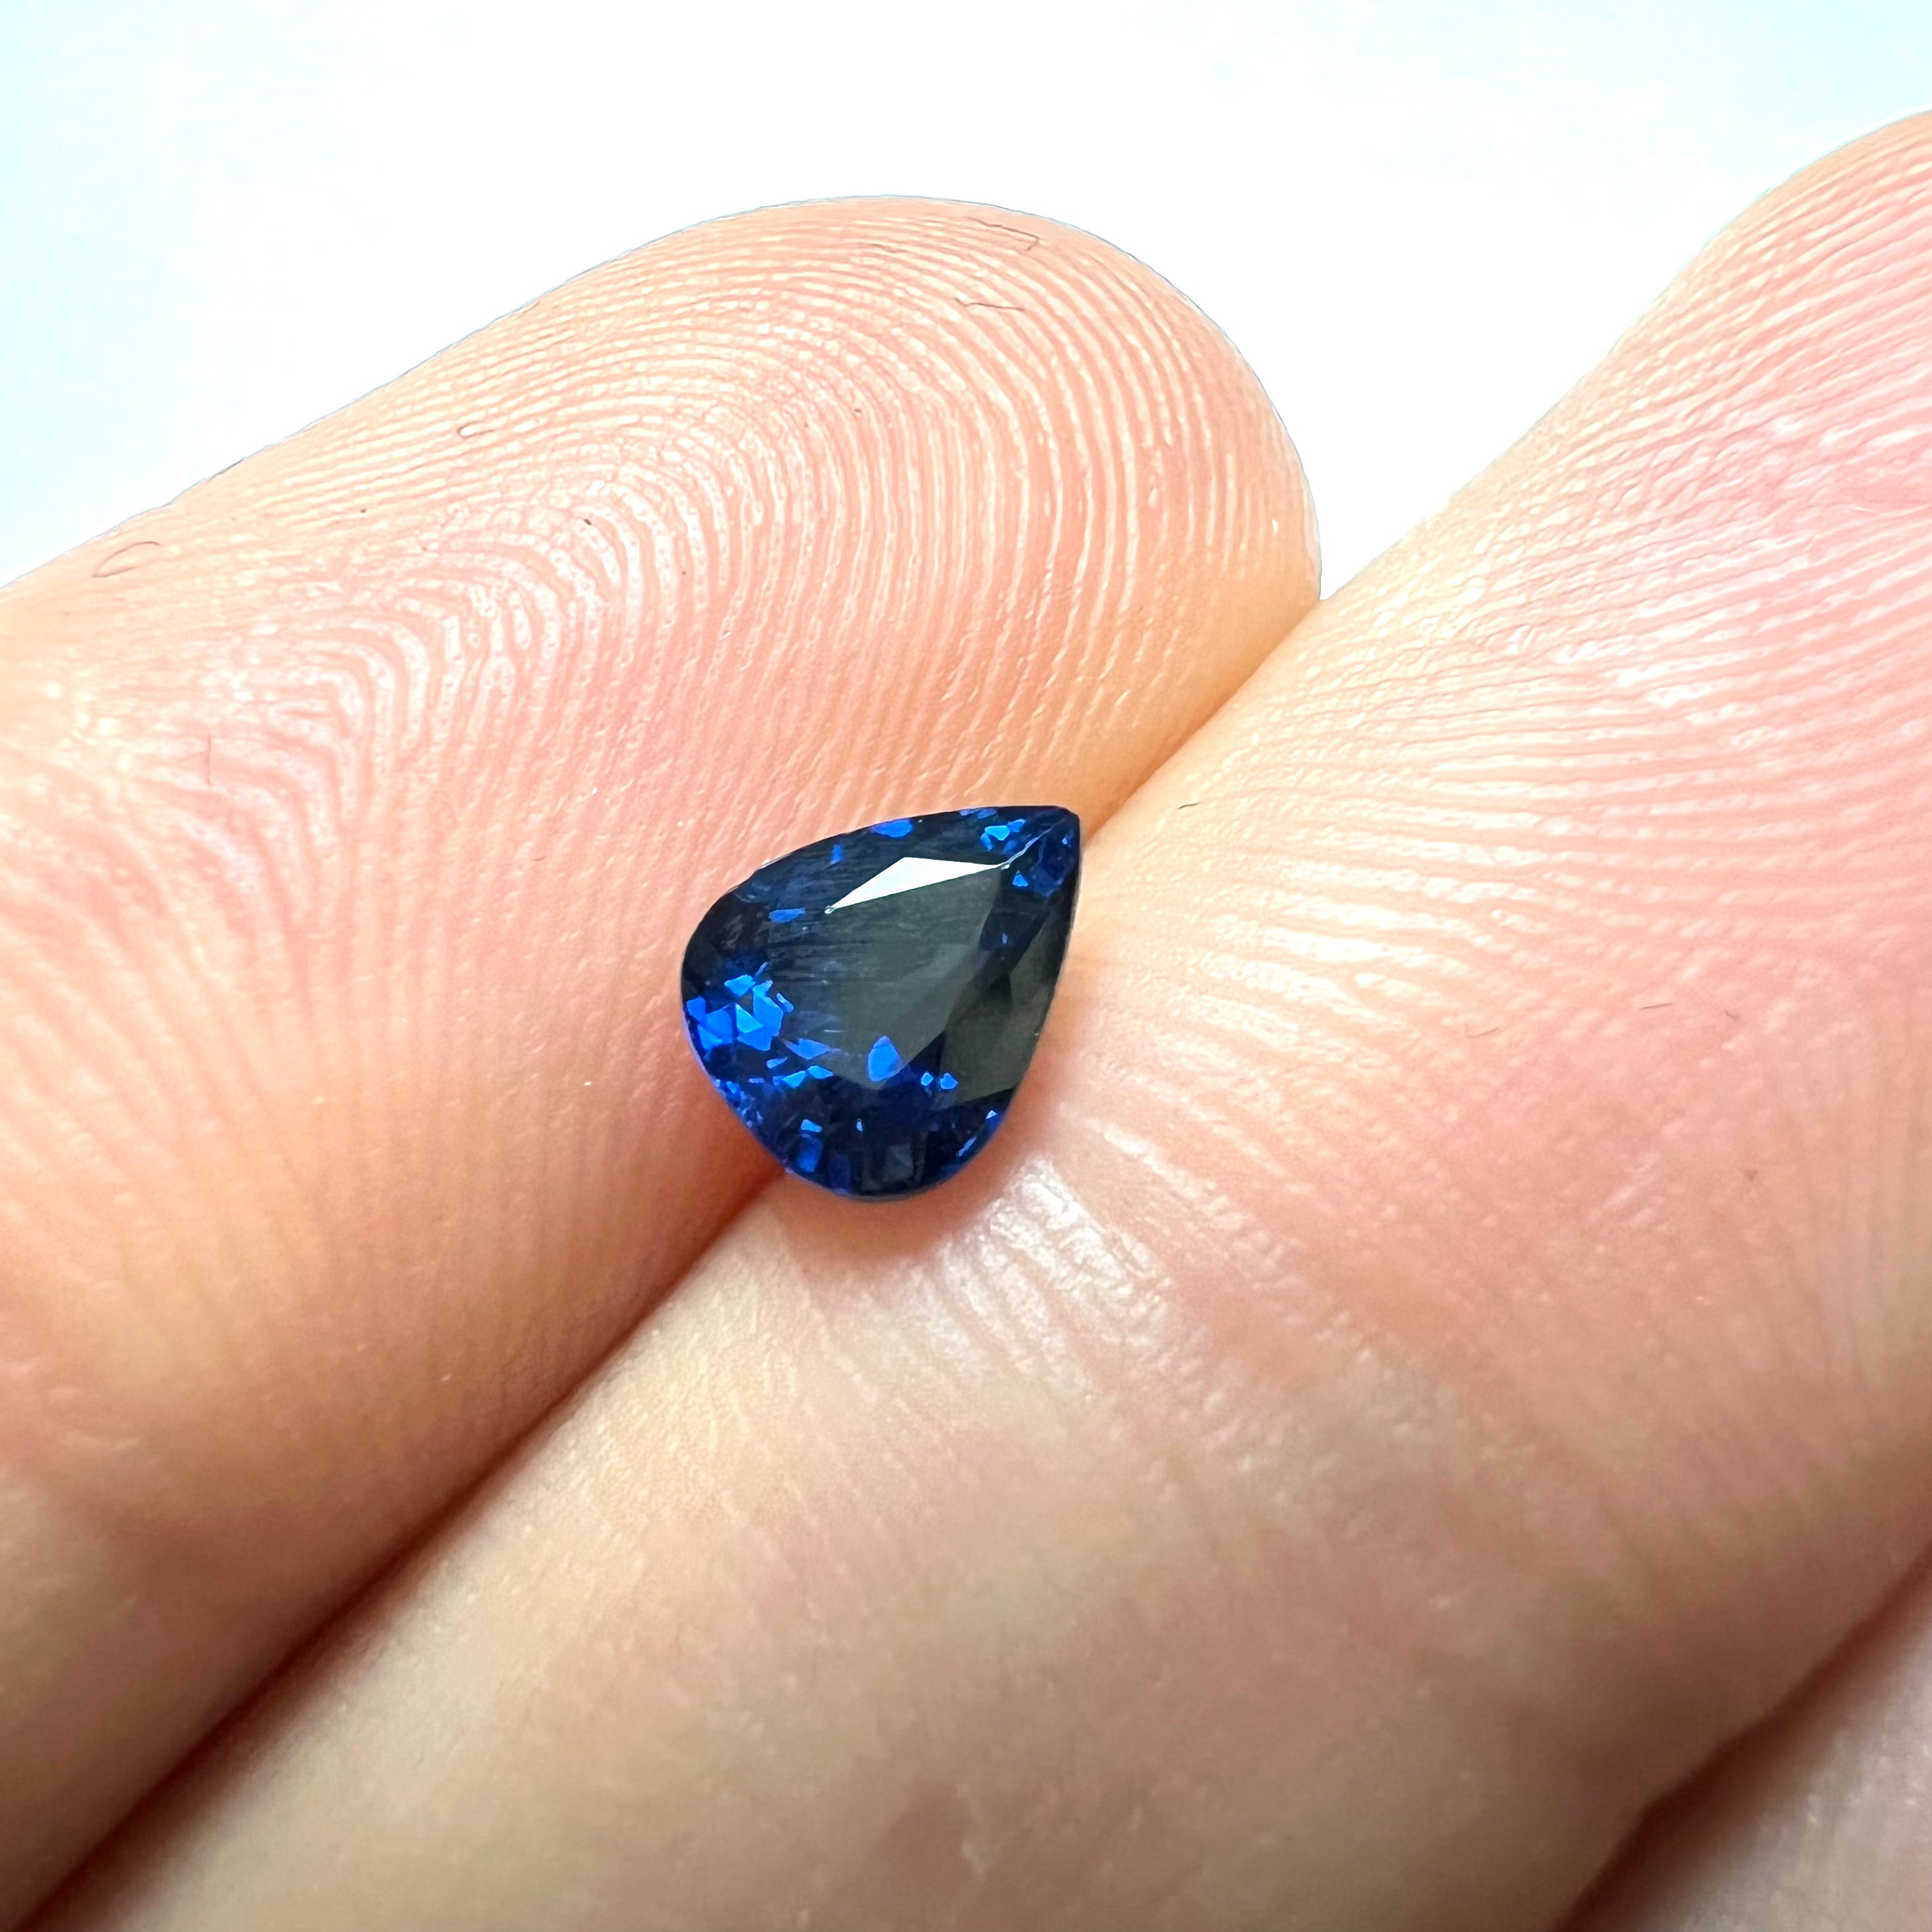 .76CT Loose Blue Pear Sapphire 6x5x4.5mmEarth mined Gemstone